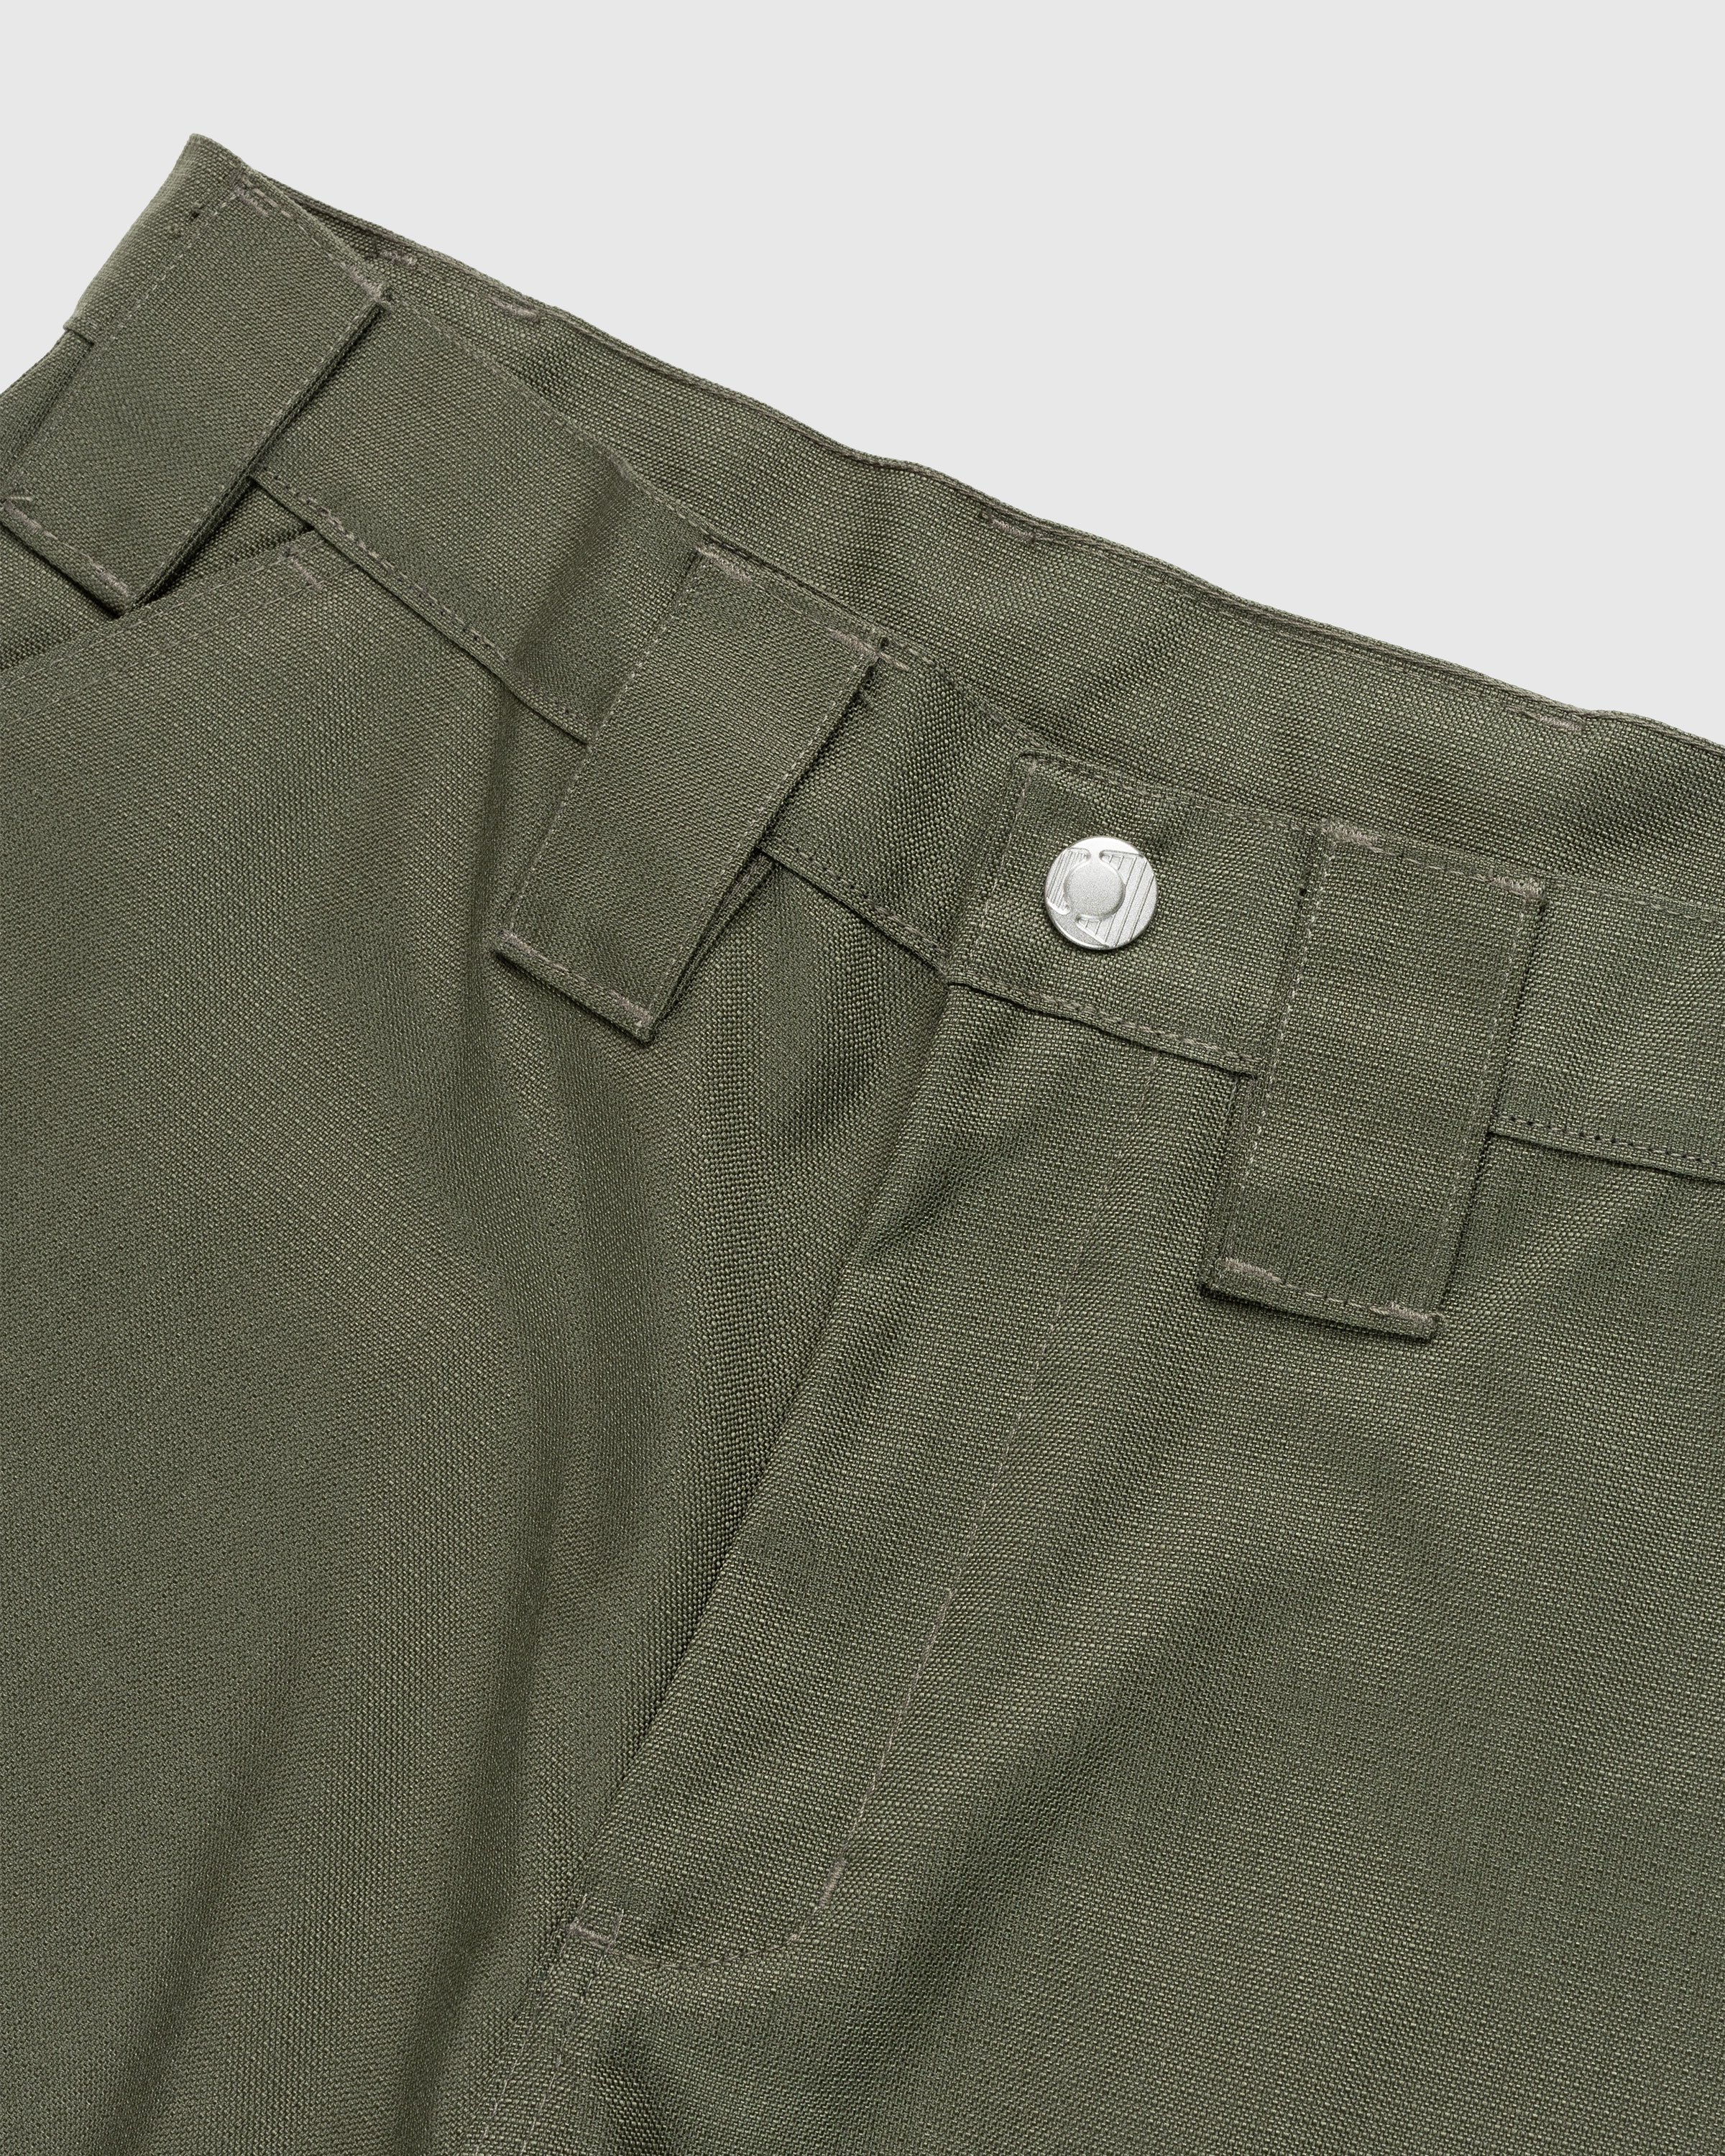 AFFXWRKS - Duty Pant Green - Clothing - Green - Image 4